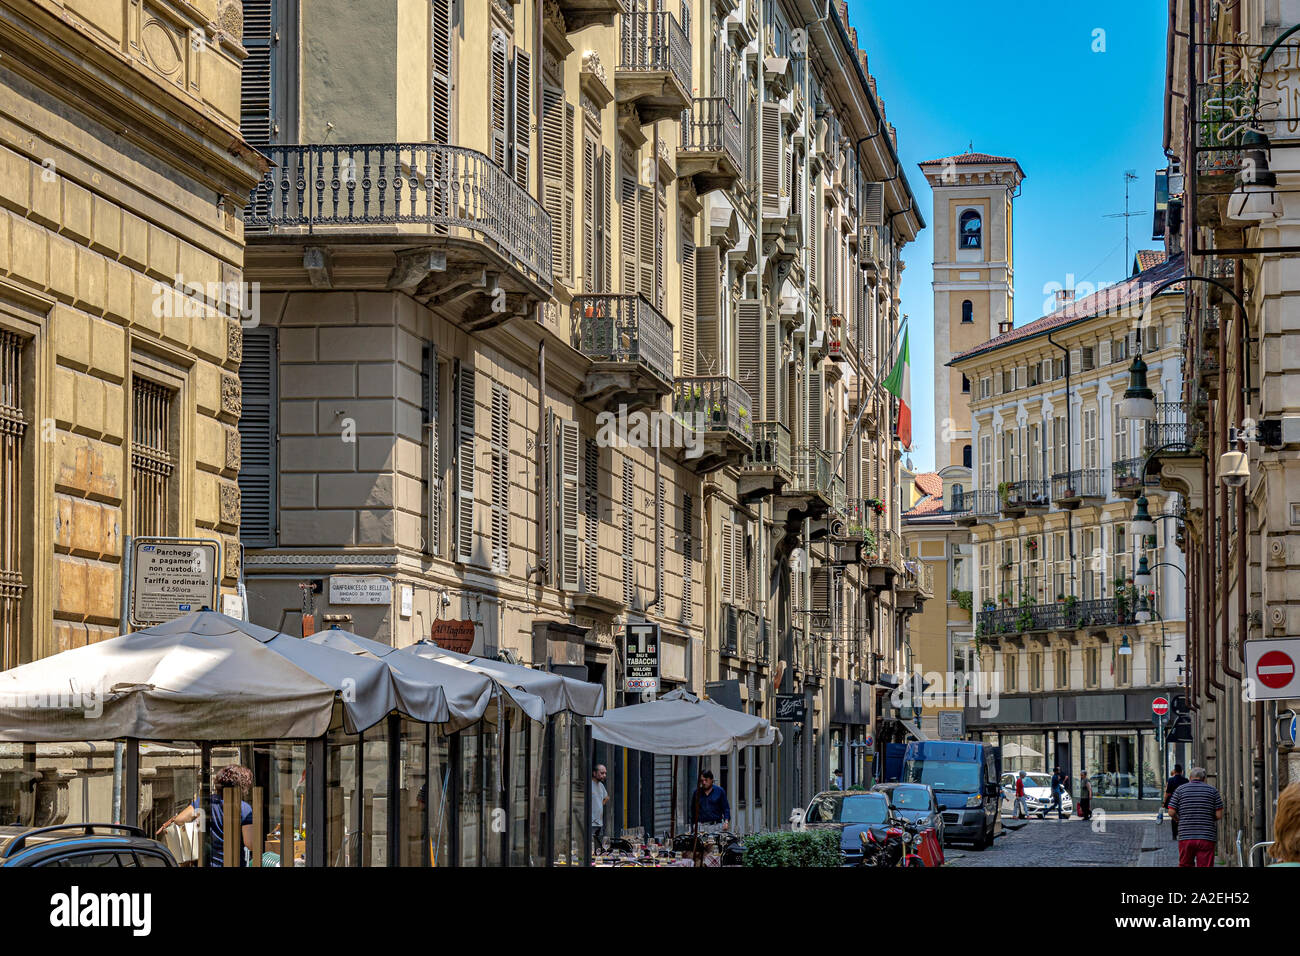 Buildings along Via Corte d'Appello in the heart of Old Town ,Turin,Italy Stock Photo